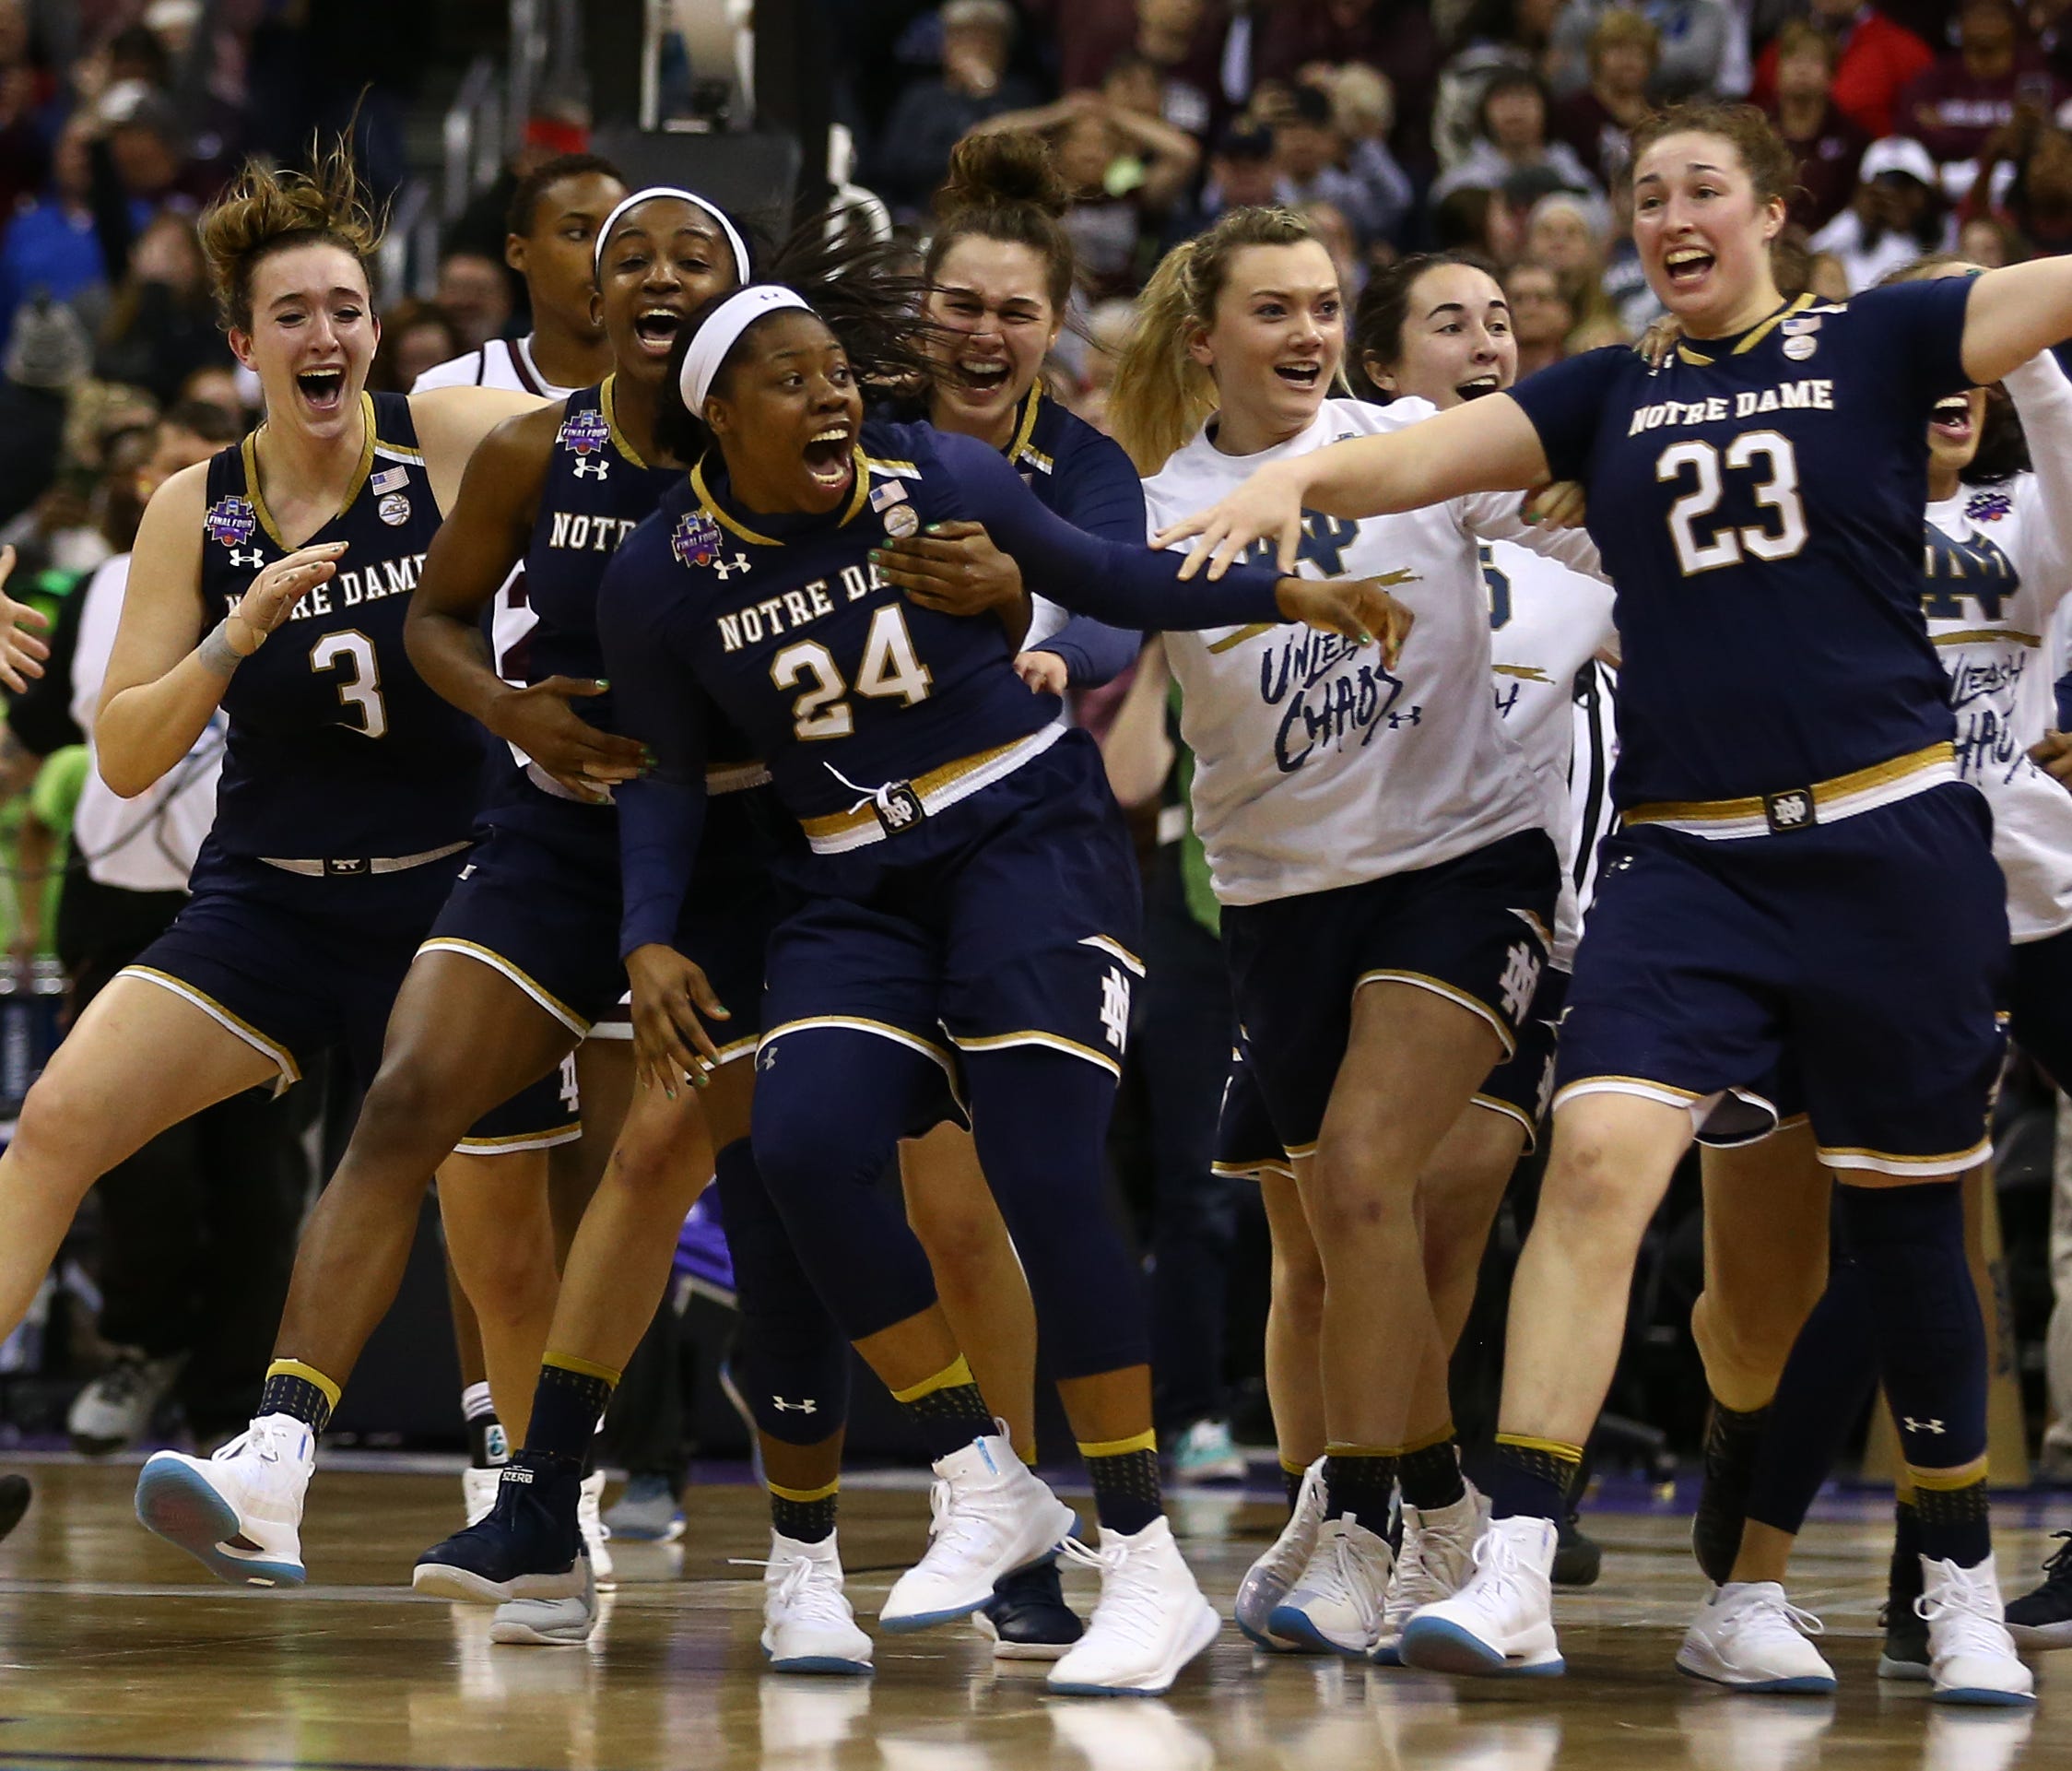 Notre Dame's Arike Ogunbowale celebrates with teammates after making the game-winning three-pointer against Mississippi State in the women's college basketball national championship at Nationwide Arena in Columbus, Ohio.